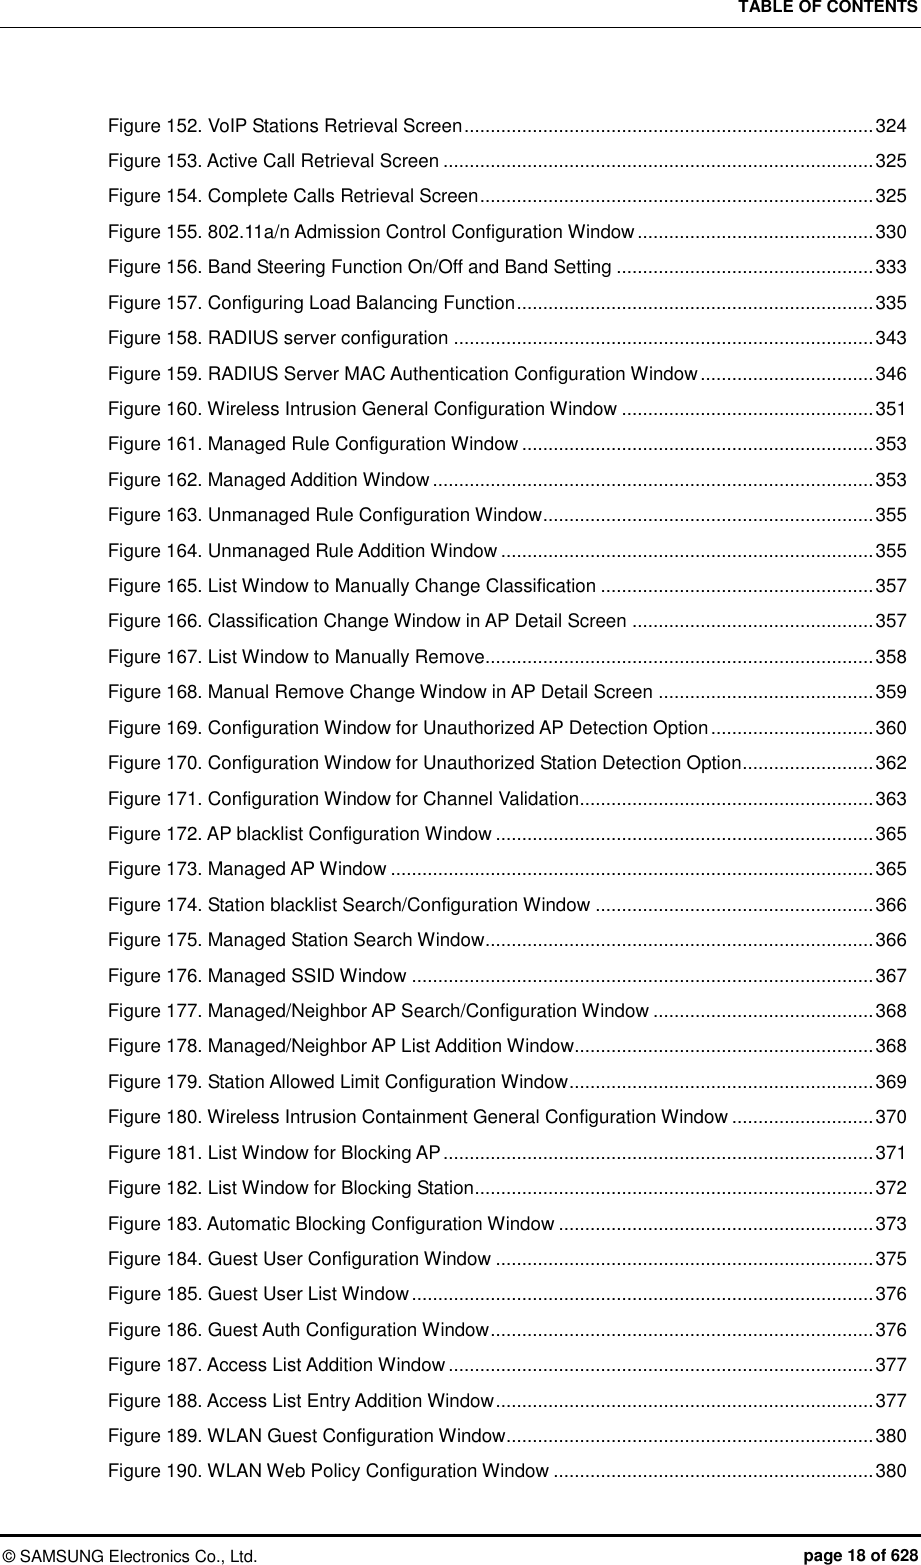 TABLE OF CONTENTS ©  SAMSUNG Electronics Co., Ltd.  page 18 of 628 Figure 152. VoIP Stations Retrieval Screen .............................................................................. 324 Figure 153. Active Call Retrieval Screen .................................................................................. 325 Figure 154. Complete Calls Retrieval Screen ........................................................................... 325 Figure 155. 802.11a/n Admission Control Configuration Window ............................................. 330 Figure 156. Band Steering Function On/Off and Band Setting ................................................. 333 Figure 157. Configuring Load Balancing Function .................................................................... 335 Figure 158. RADIUS server configuration ................................................................................ 343 Figure 159. RADIUS Server MAC Authentication Configuration Window ................................. 346 Figure 160. Wireless Intrusion General Configuration Window ................................................ 351 Figure 161. Managed Rule Configuration Window ................................................................... 353 Figure 162. Managed Addition Window .................................................................................... 353 Figure 163. Unmanaged Rule Configuration Window ............................................................... 355 Figure 164. Unmanaged Rule Addition Window ....................................................................... 355 Figure 165. List Window to Manually Change Classification .................................................... 357 Figure 166. Classification Change Window in AP Detail Screen .............................................. 357 Figure 167. List Window to Manually Remove.......................................................................... 358 Figure 168. Manual Remove Change Window in AP Detail Screen ......................................... 359 Figure 169. Configuration Window for Unauthorized AP Detection Option ............................... 360 Figure 170. Configuration Window for Unauthorized Station Detection Option......................... 362 Figure 171. Configuration Window for Channel Validation........................................................ 363 Figure 172. AP blacklist Configuration Window ........................................................................ 365 Figure 173. Managed AP Window ............................................................................................ 365 Figure 174. Station blacklist Search/Configuration Window ..................................................... 366 Figure 175. Managed Station Search Window .......................................................................... 366 Figure 176. Managed SSID Window ........................................................................................ 367 Figure 177. Managed/Neighbor AP Search/Configuration Window .......................................... 368 Figure 178. Managed/Neighbor AP List Addition Window......................................................... 368 Figure 179. Station Allowed Limit Configuration Window .......................................................... 369 Figure 180. Wireless Intrusion Containment General Configuration Window ........................... 370 Figure 181. List Window for Blocking AP .................................................................................. 371 Figure 182. List Window for Blocking Station ............................................................................ 372 Figure 183. Automatic Blocking Configuration Window ............................................................ 373 Figure 184. Guest User Configuration Window ........................................................................ 375 Figure 185. Guest User List Window ........................................................................................ 376 Figure 186. Guest Auth Configuration Window ......................................................................... 376 Figure 187. Access List Addition Window ................................................................................. 377 Figure 188. Access List Entry Addition Window ........................................................................ 377 Figure 189. WLAN Guest Configuration Window ...................................................................... 380 Figure 190. WLAN Web Policy Configuration Window ............................................................. 380 